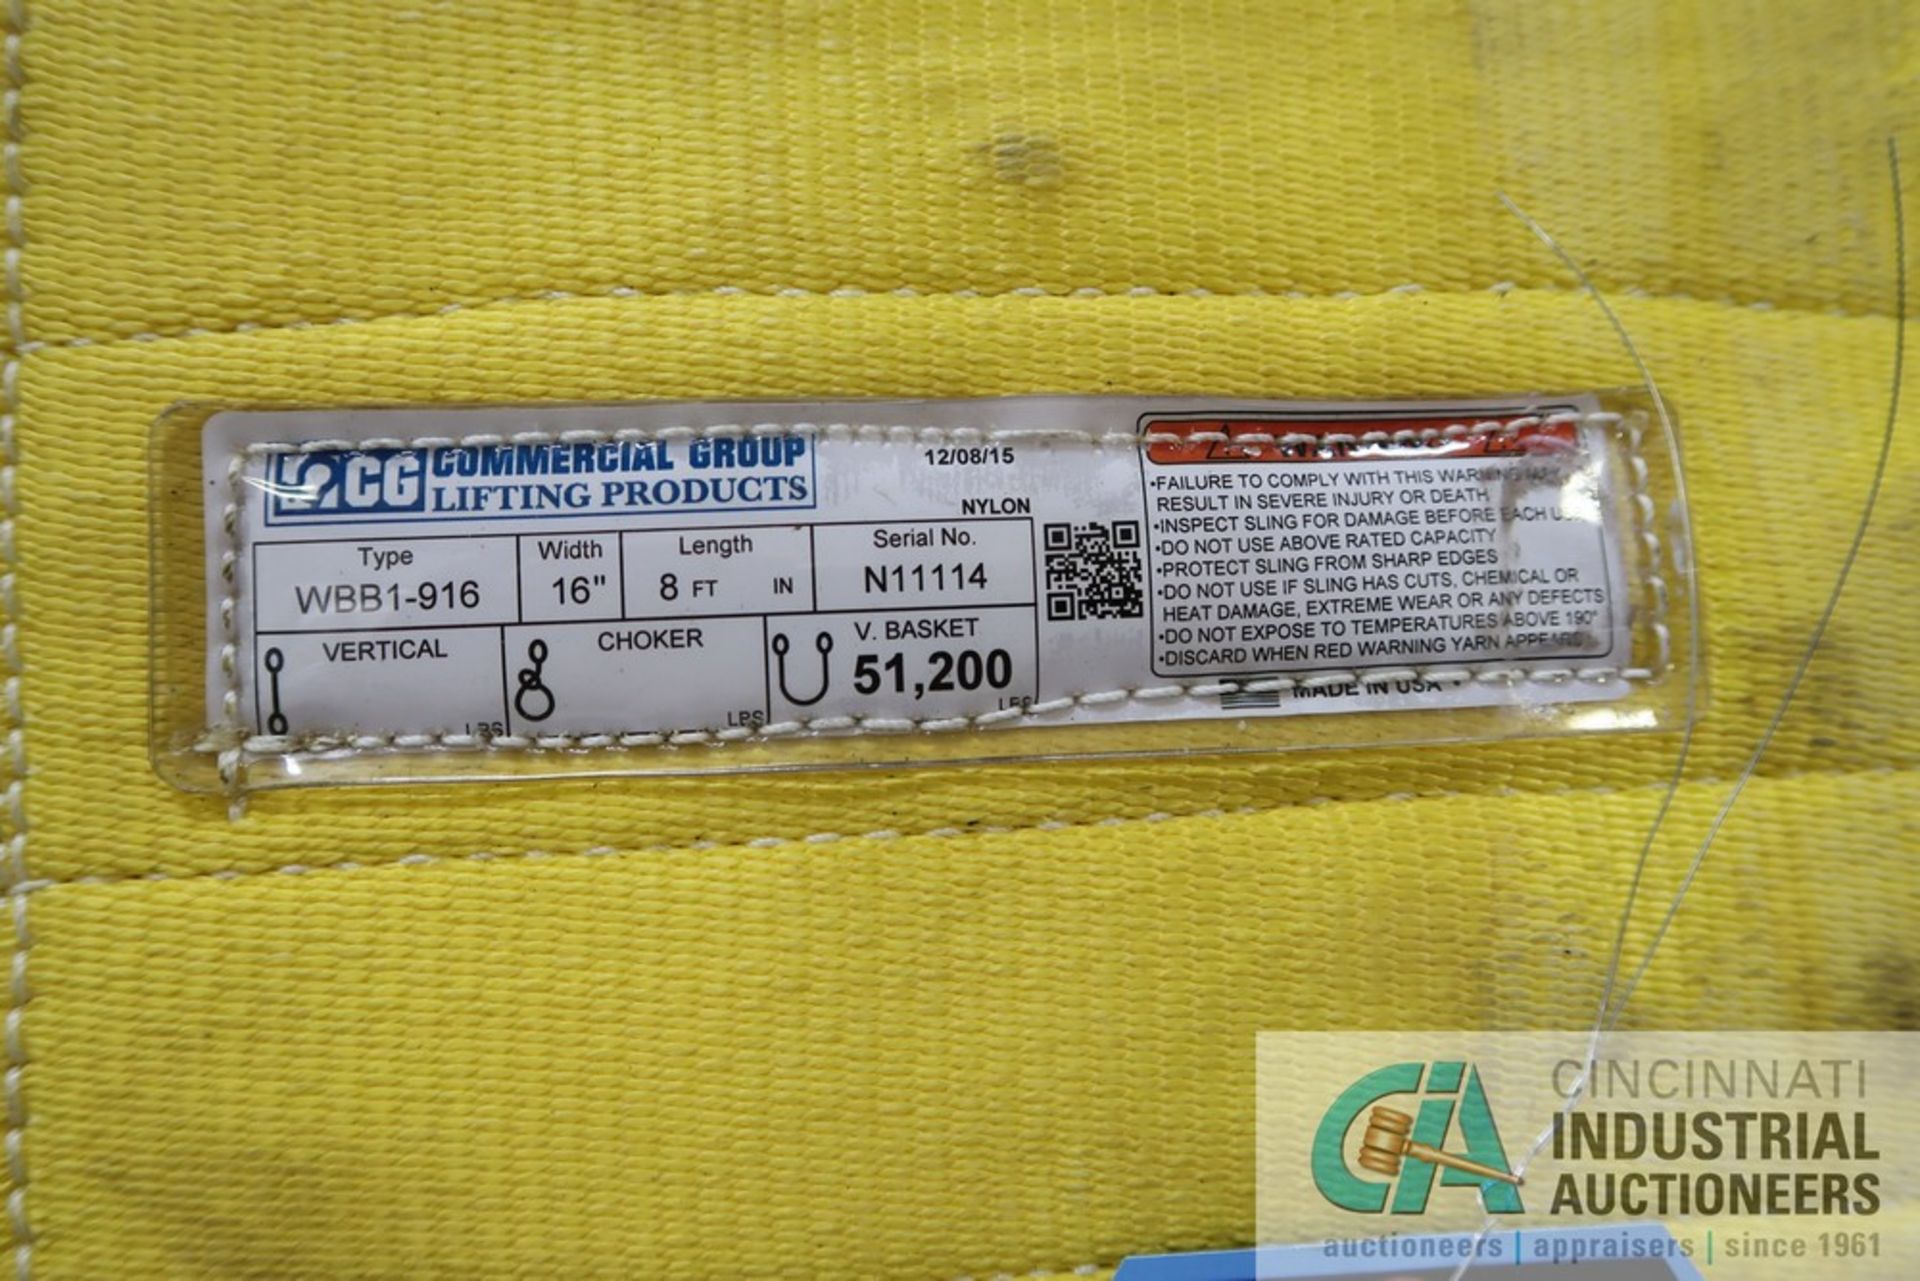 51,200 LB. X 16" WIDE X 8' LONG COMMERCIAL GROUP TYPE WBB1-916 NYLON LIFTING STRAP - Image 2 of 2